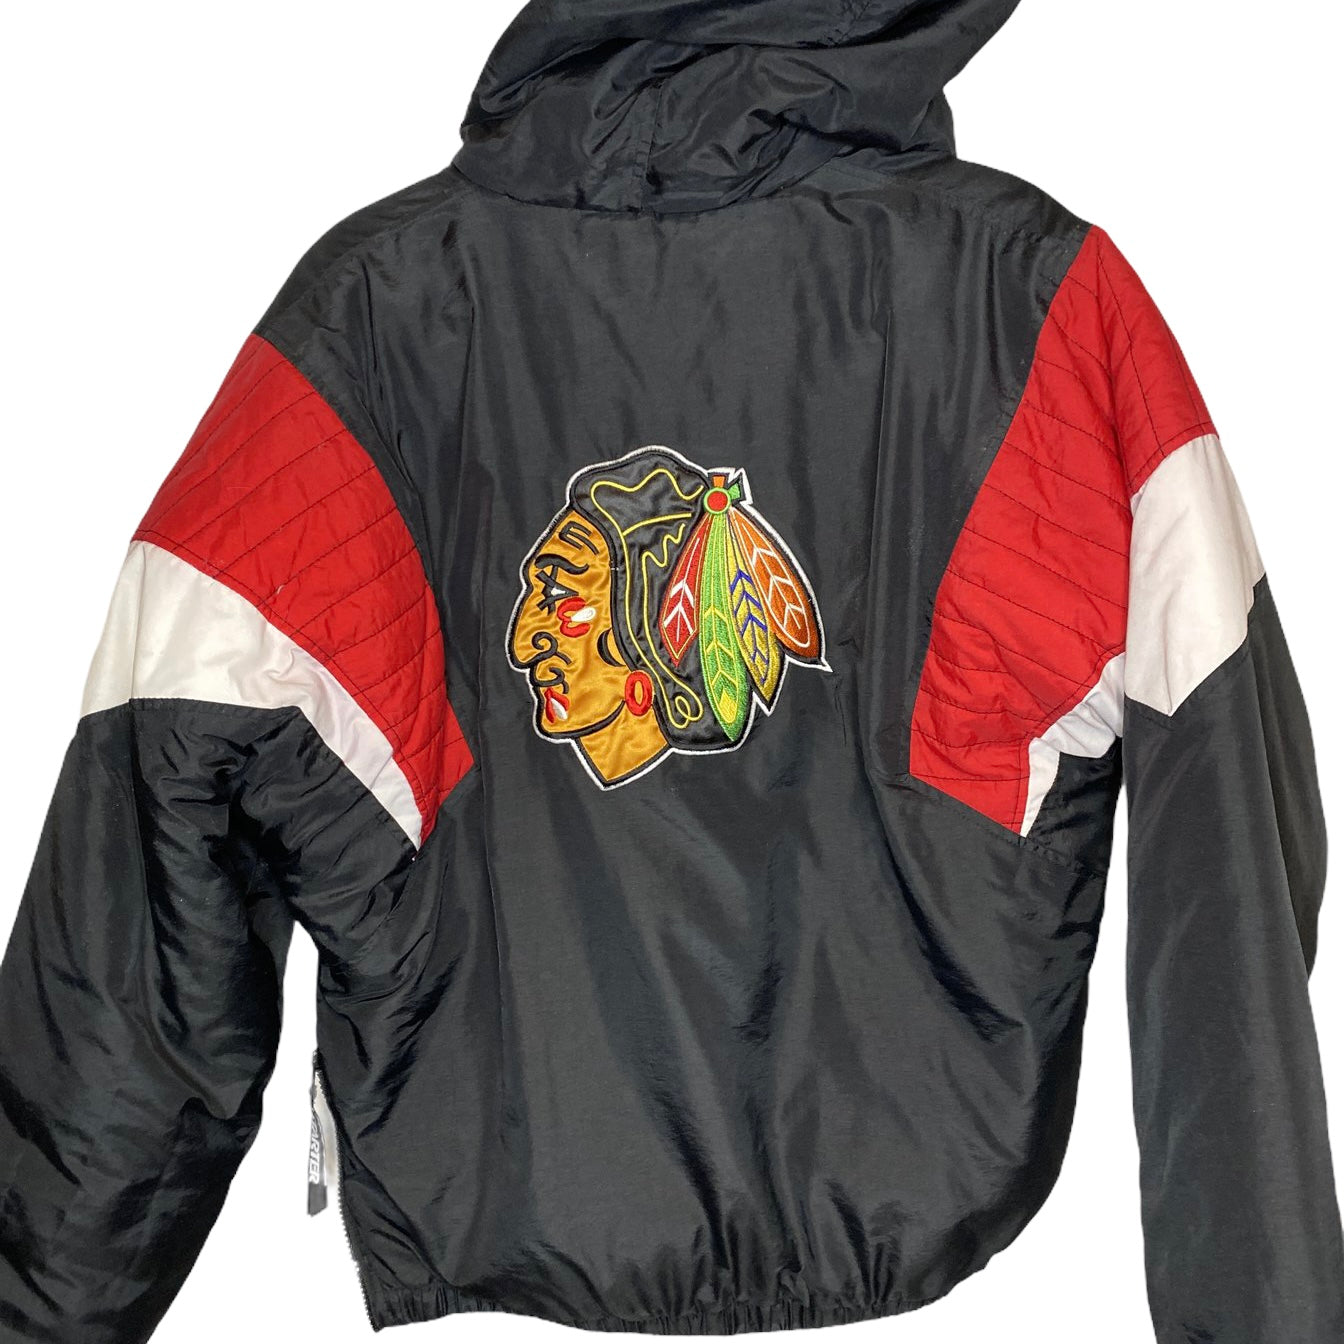 Vintage Chicago Blackhawks Logo 7 Jacket in store now! Size Medium for $50!  👟👟👟👟👟 The Dawg Pound Sneakers 206 Commons Dr. Geneva IL…